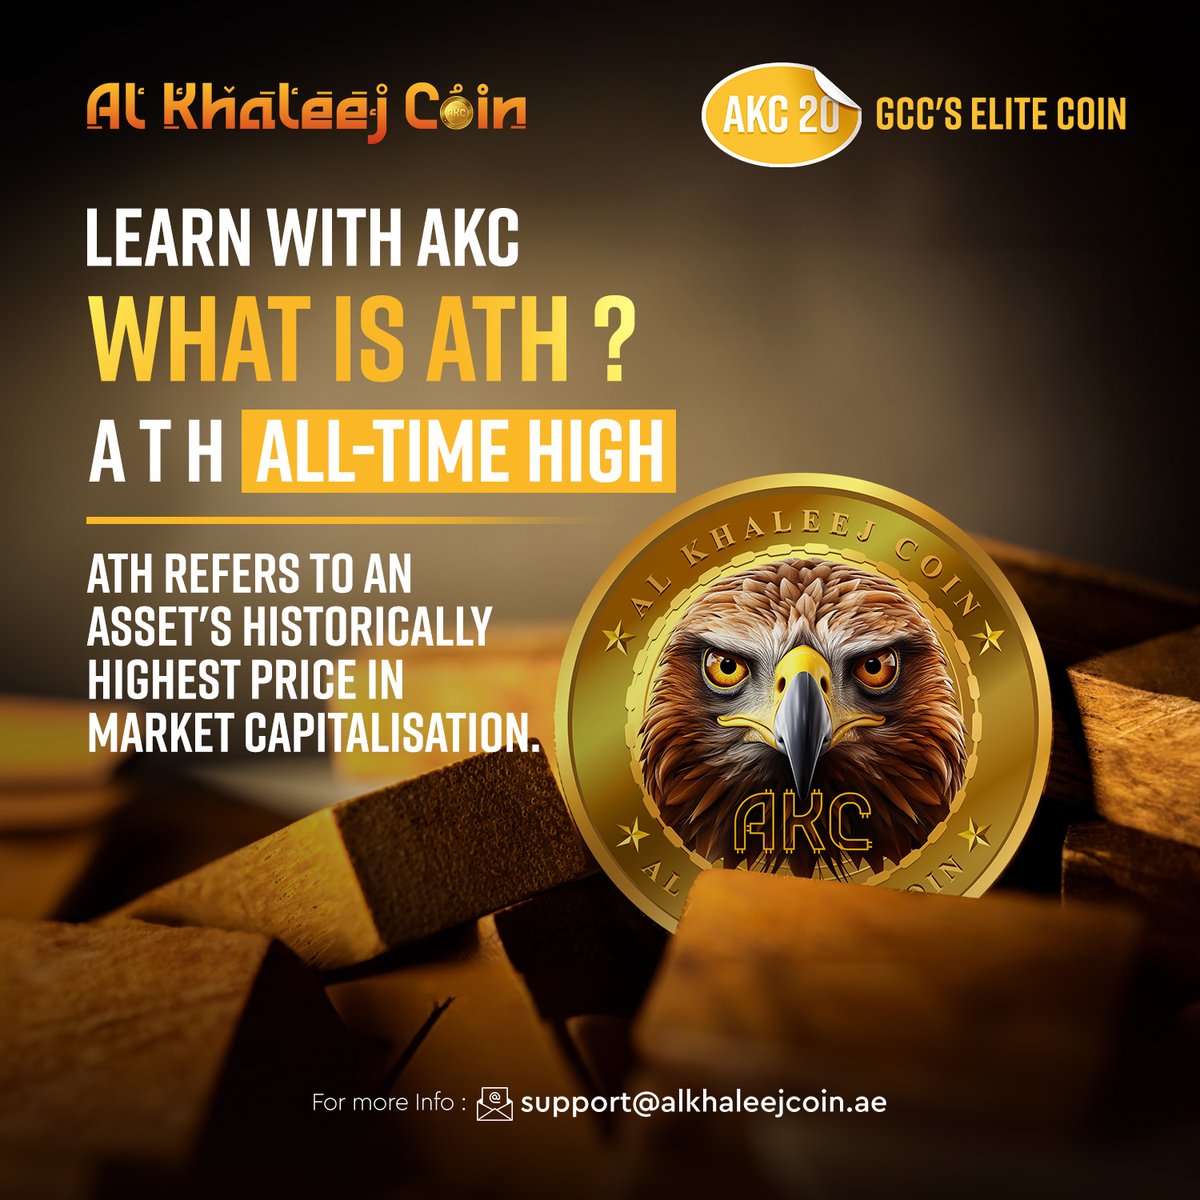 Hello Crypto enthusiasts! 🌞 Today's lesson: ATH! ATH stands for All-Time High, marking an asset's peak market value. Join us to explore more crypto insights with AKC! 💡🚀 #Crypto #ATH #LearnWithAKC #akc #alkhaleejcoin #elitecoin #gcccoin